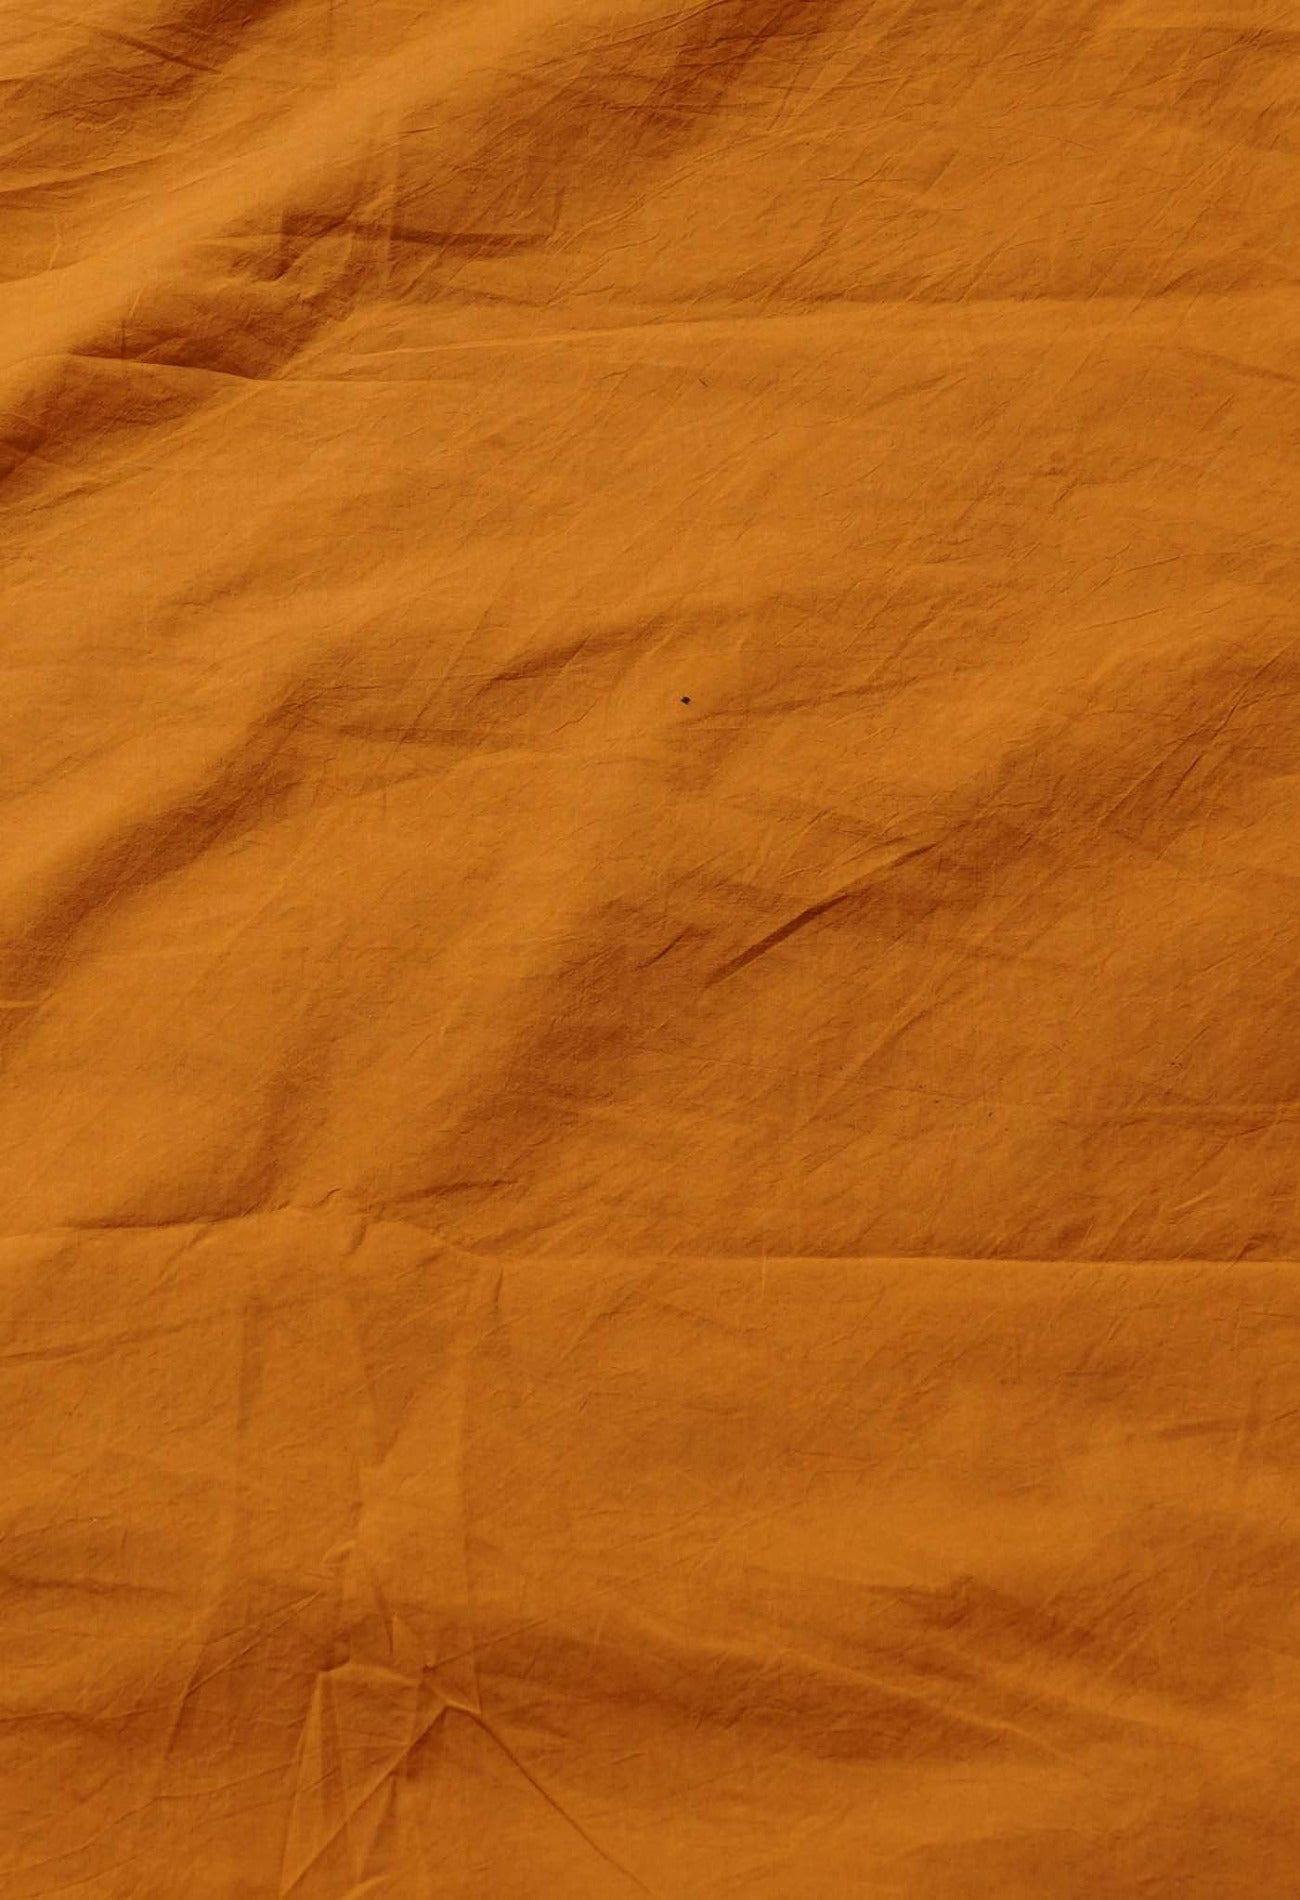 Online Shopping for Orange Pure Bagh Chanderi Cotton Saree with Bagh from Madhya Pradesh at Unnatisilks.com India
